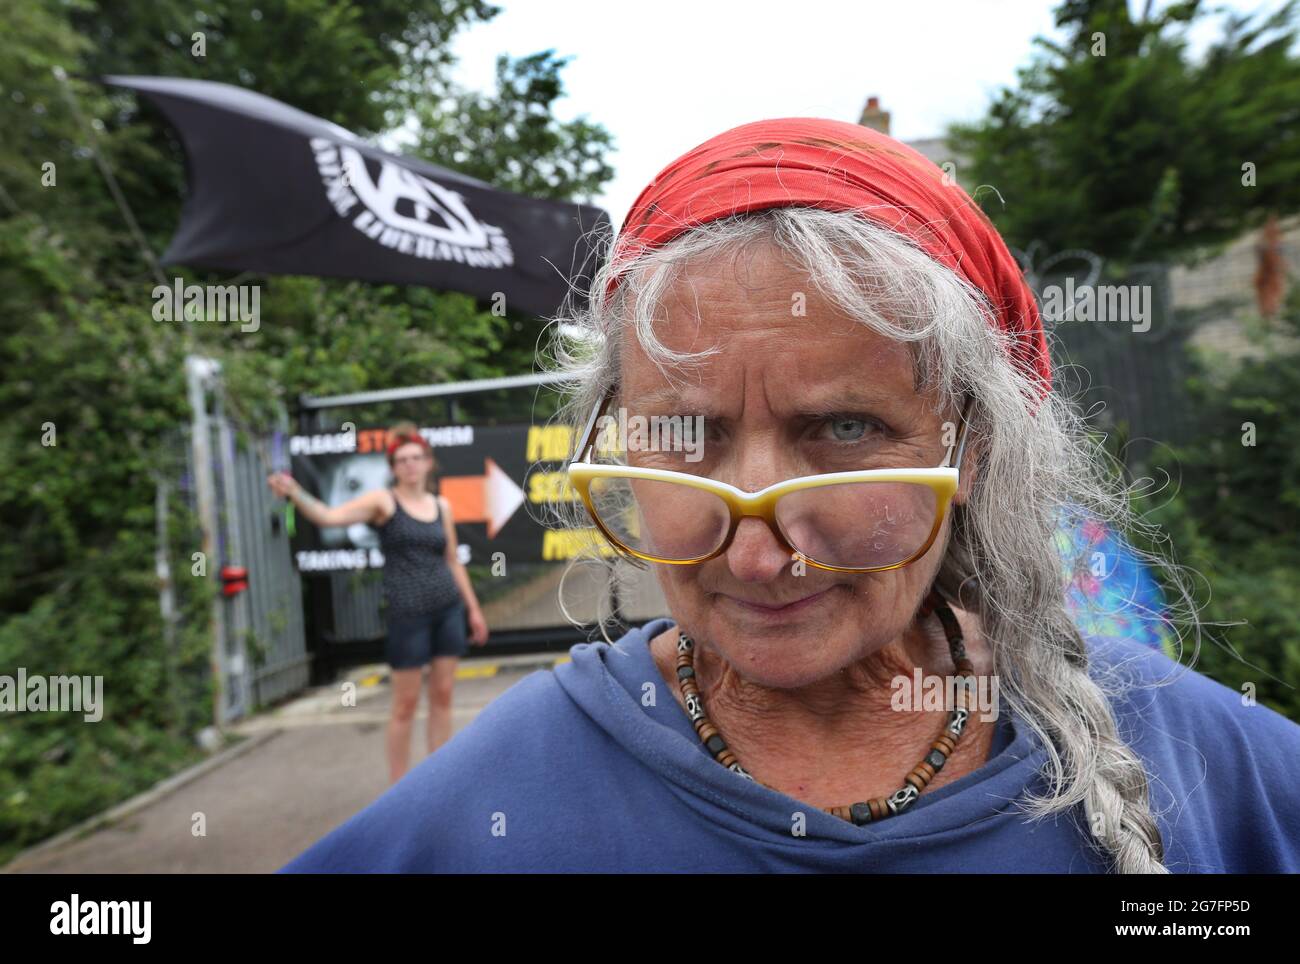 Huntingdon, UK. 13th July, 2021. An Animal Liberation Front (ALF) flag is  being waved behind camp founder Polly during the  rights  activists occupy Camp Beagle, a protest camp on the roadside